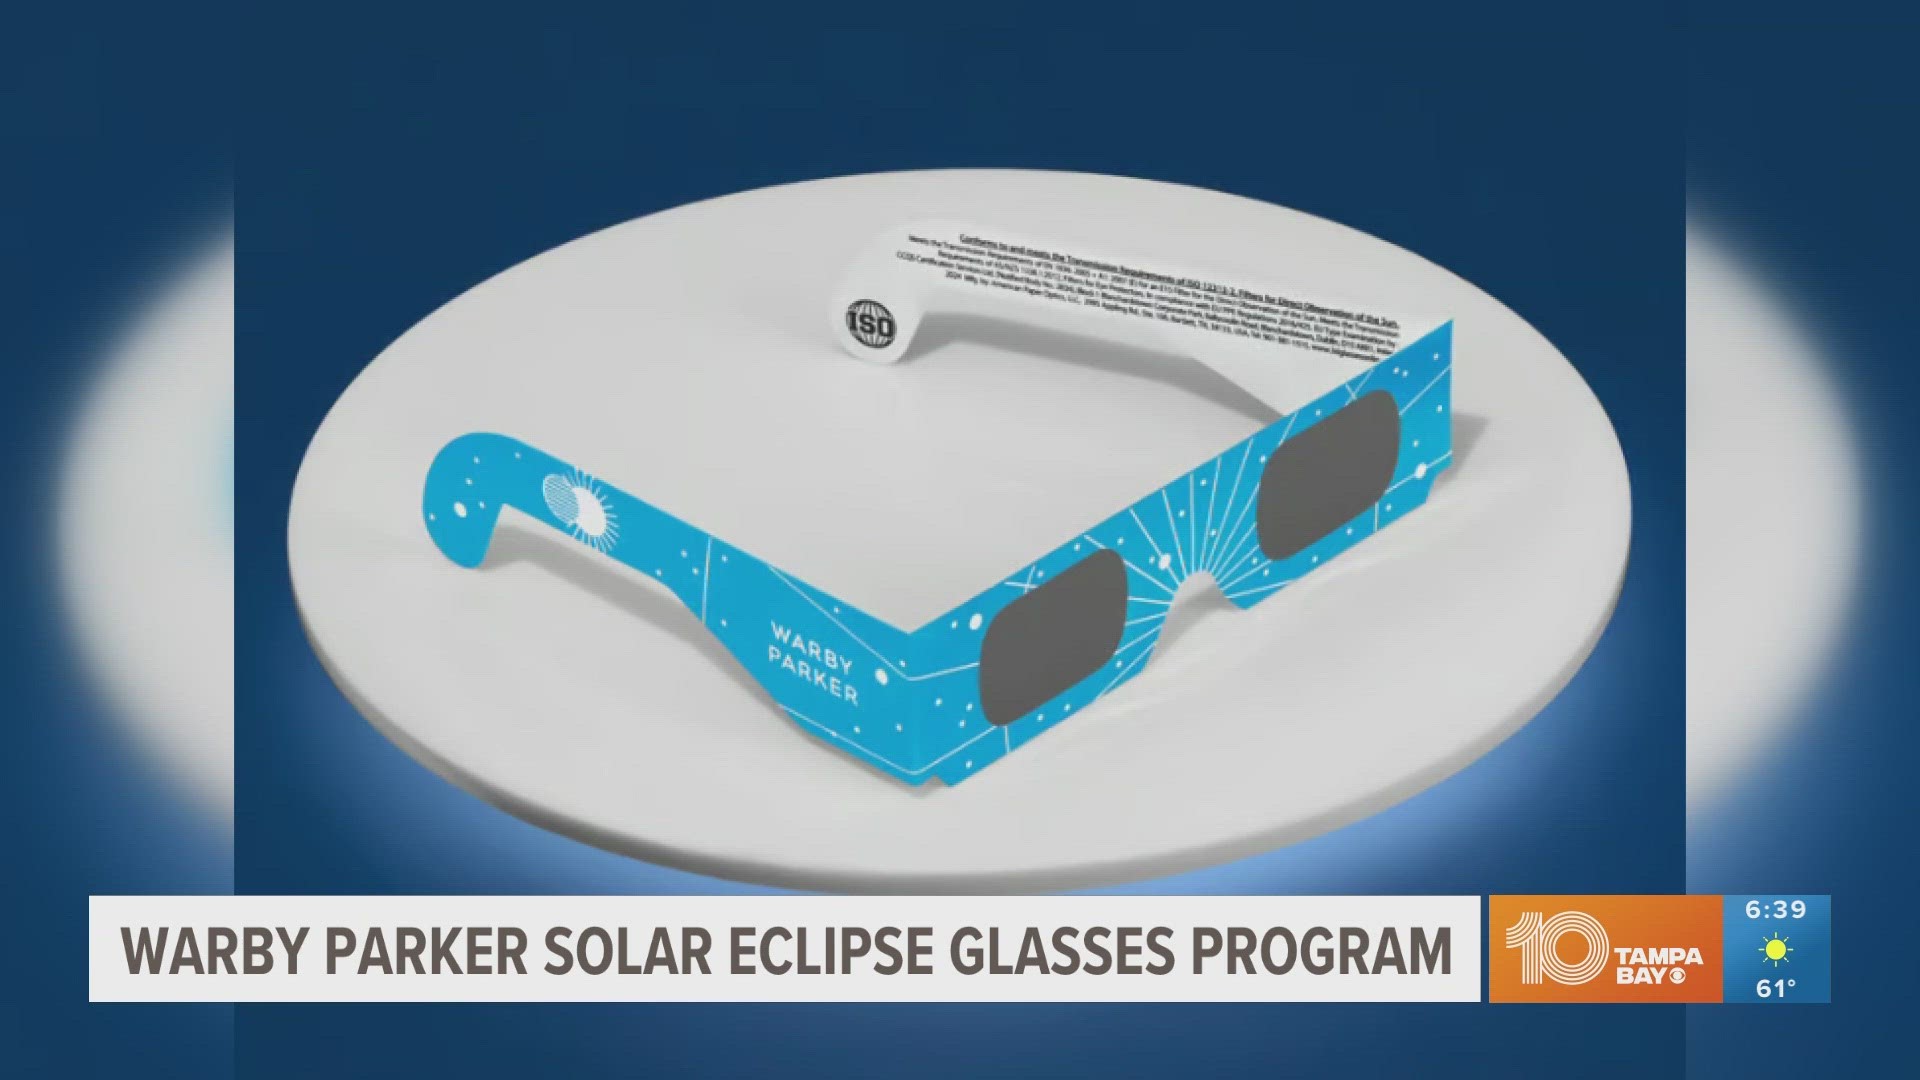 The company is offering free glasses at its stores nationwide. After the eclipse, you can donate gently used glasses back to be given to educators and students.